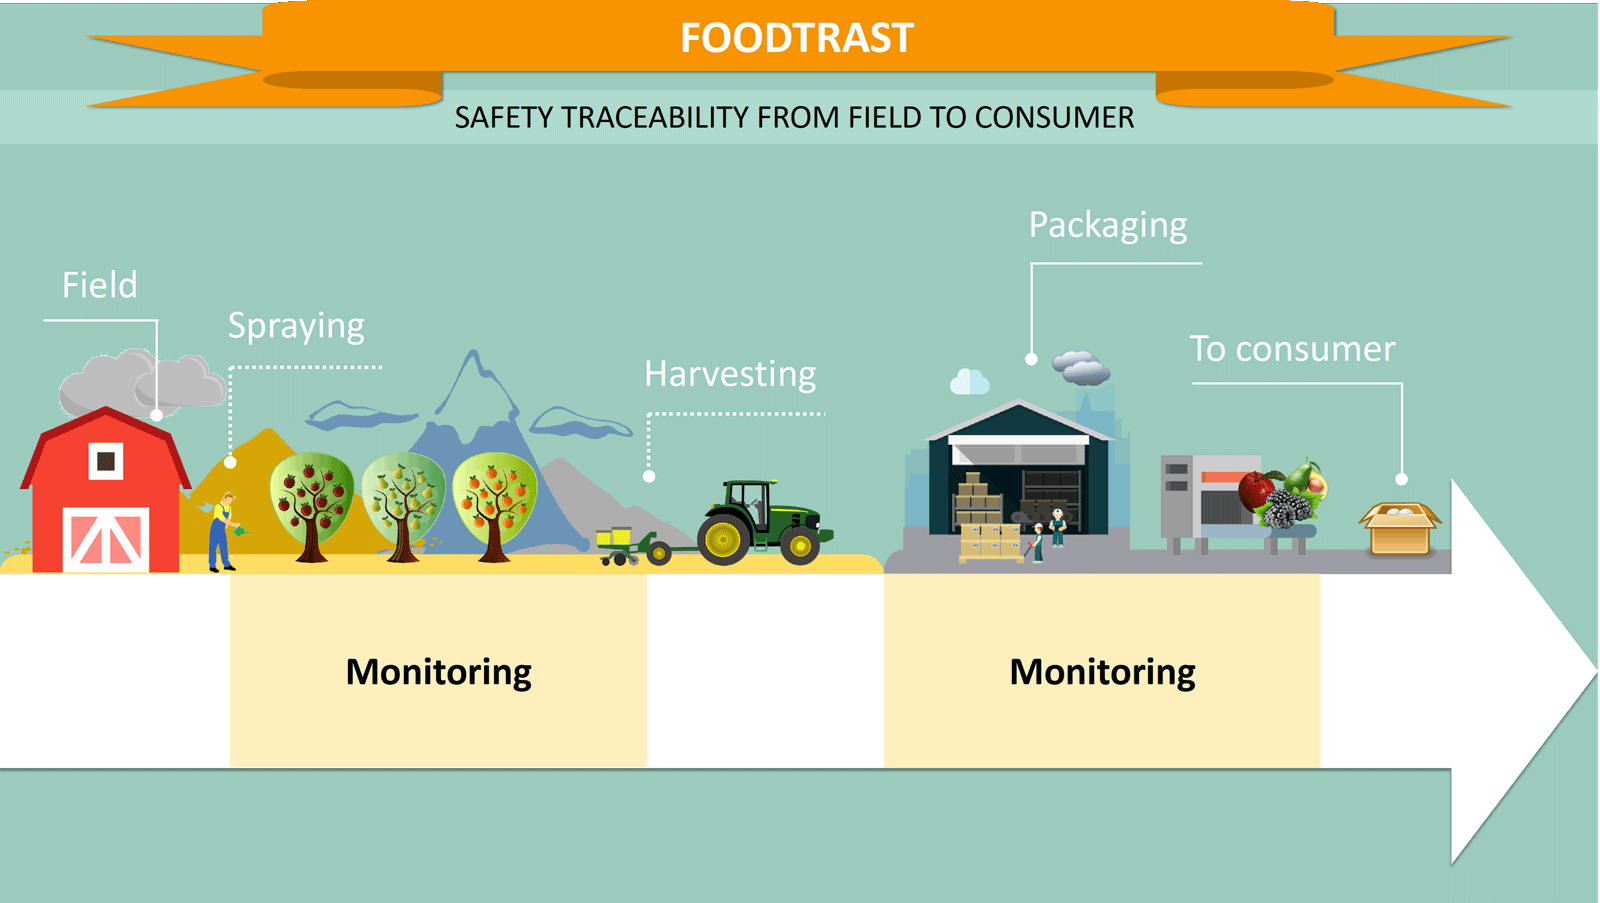 The aim of FOODTRAST project is the development of a portable spectroscopic system for rapid, non-invasive, diagnostic and qualitative analysis of agricultural products